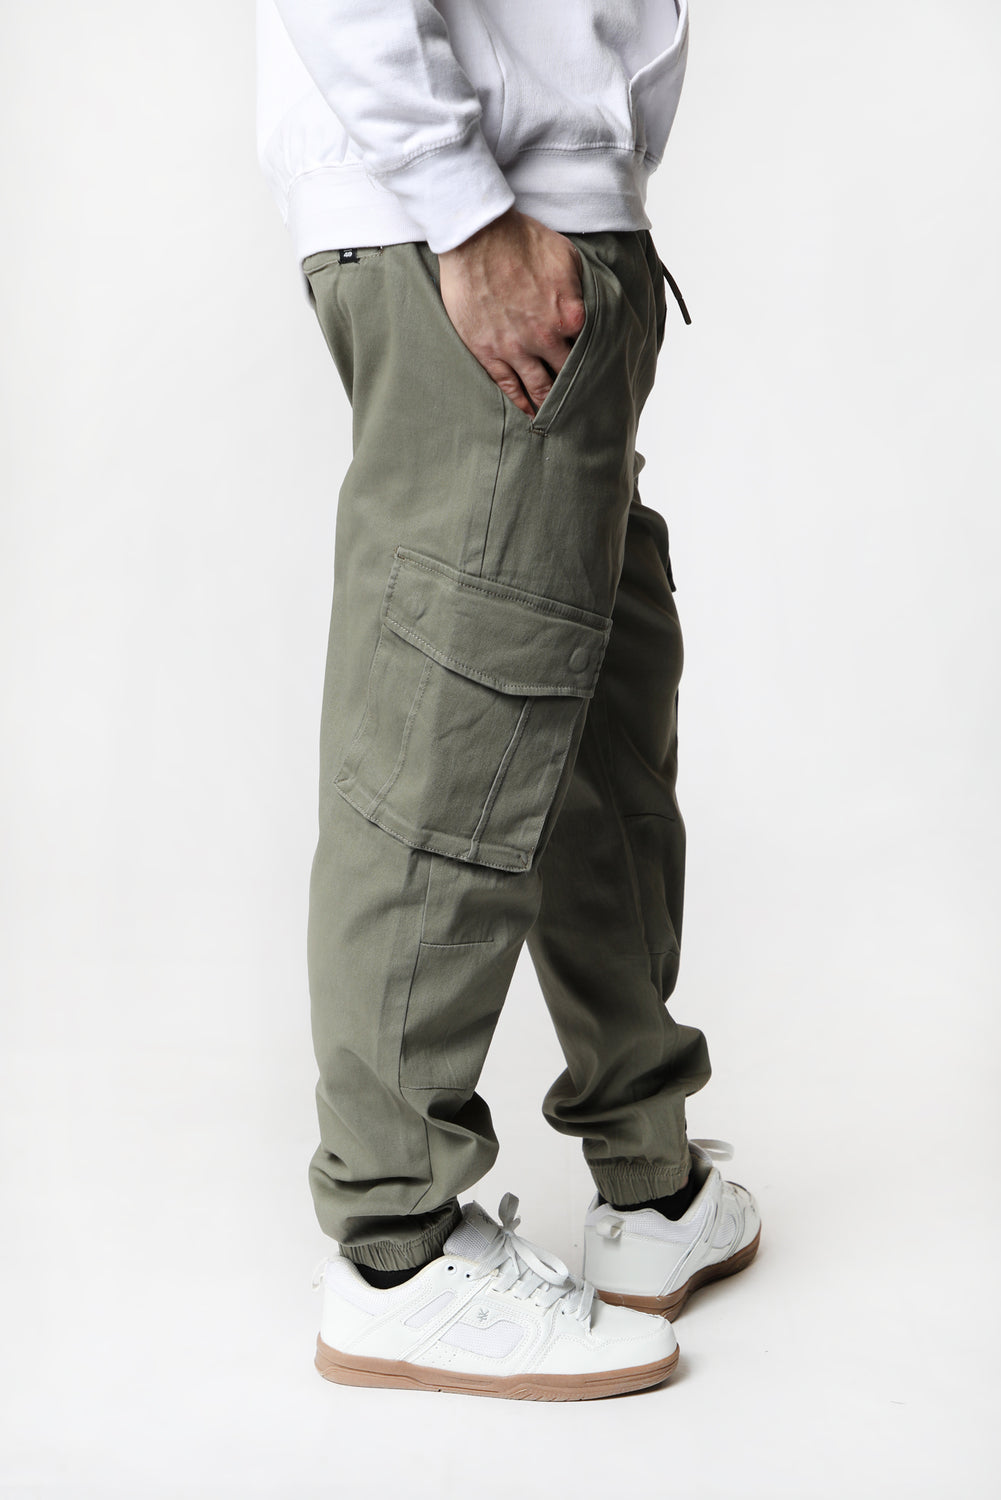 West49 Mens Twill Cargo Jogger West49 Mens Twill Cargo Jogger